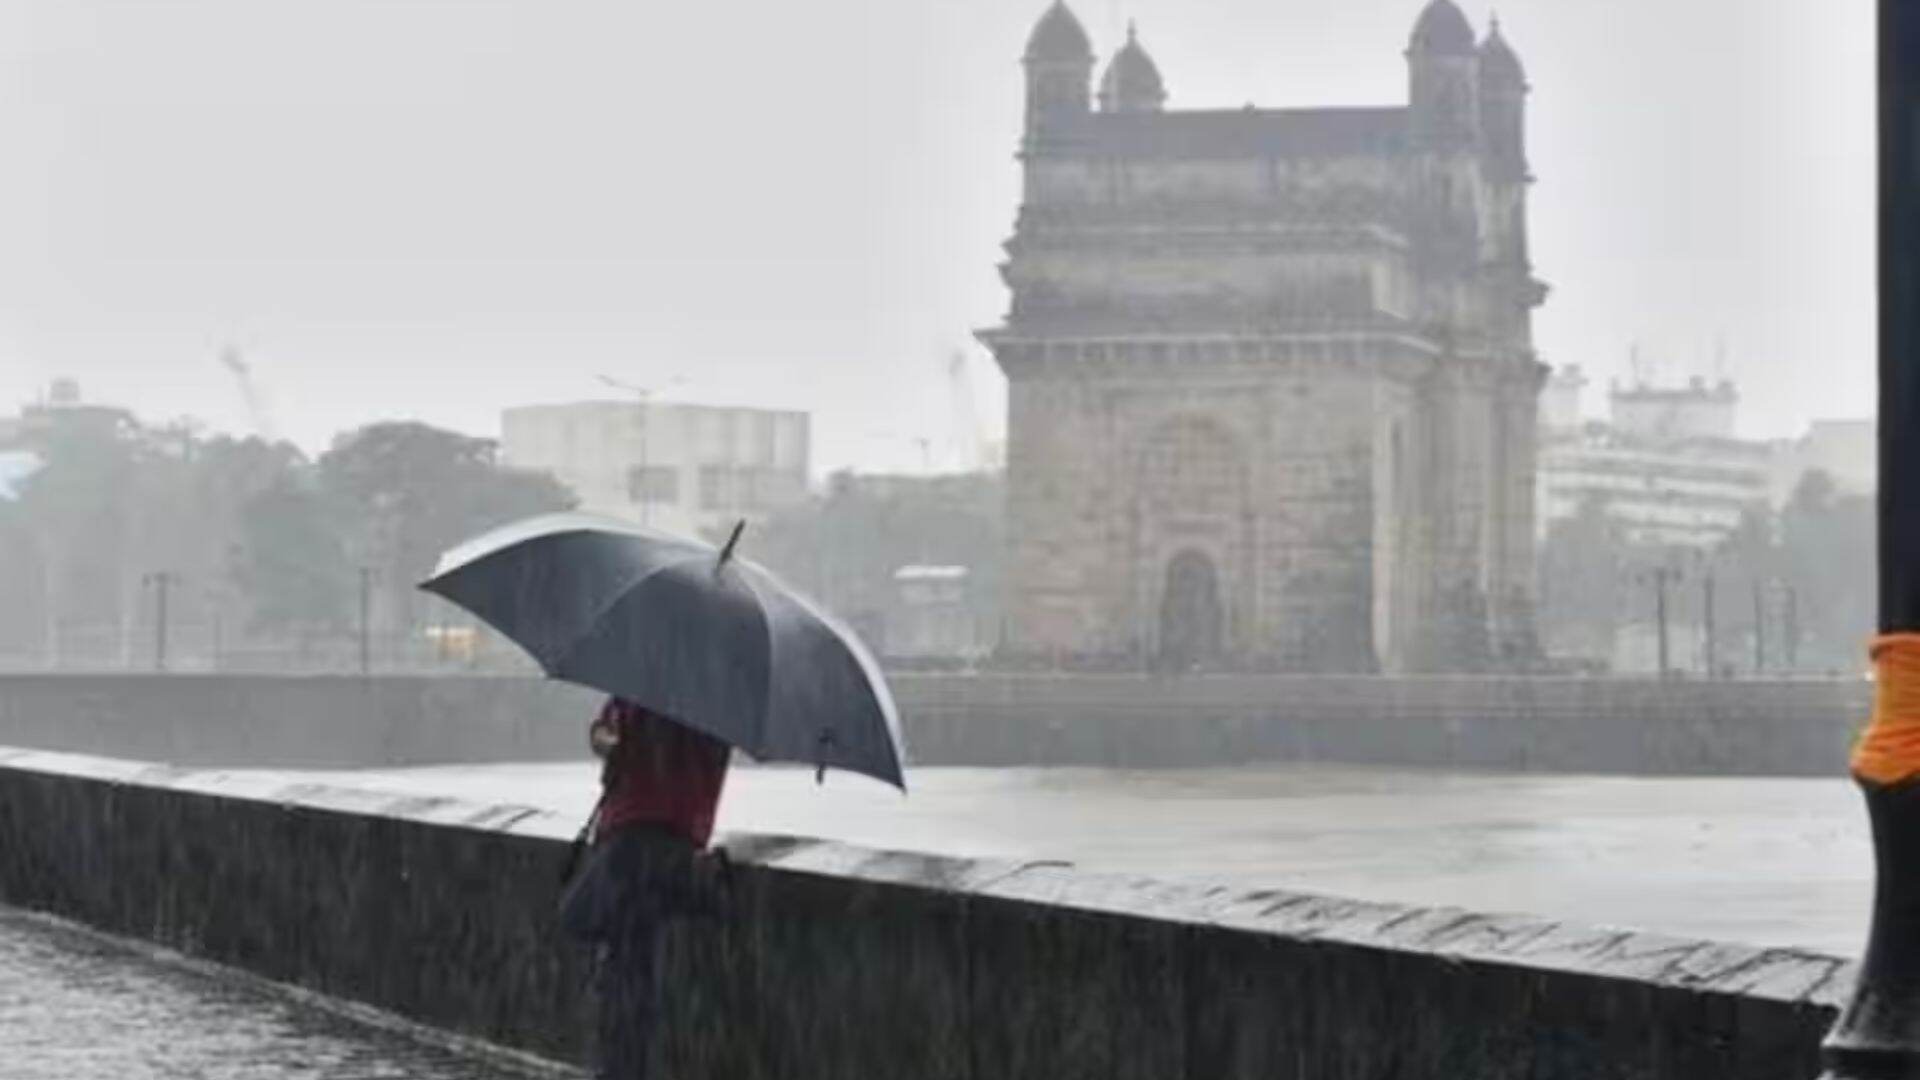 Mumbai Pre-Monsoon Images Flood Social Media As Rain Pictures And Videos Dominate Internet